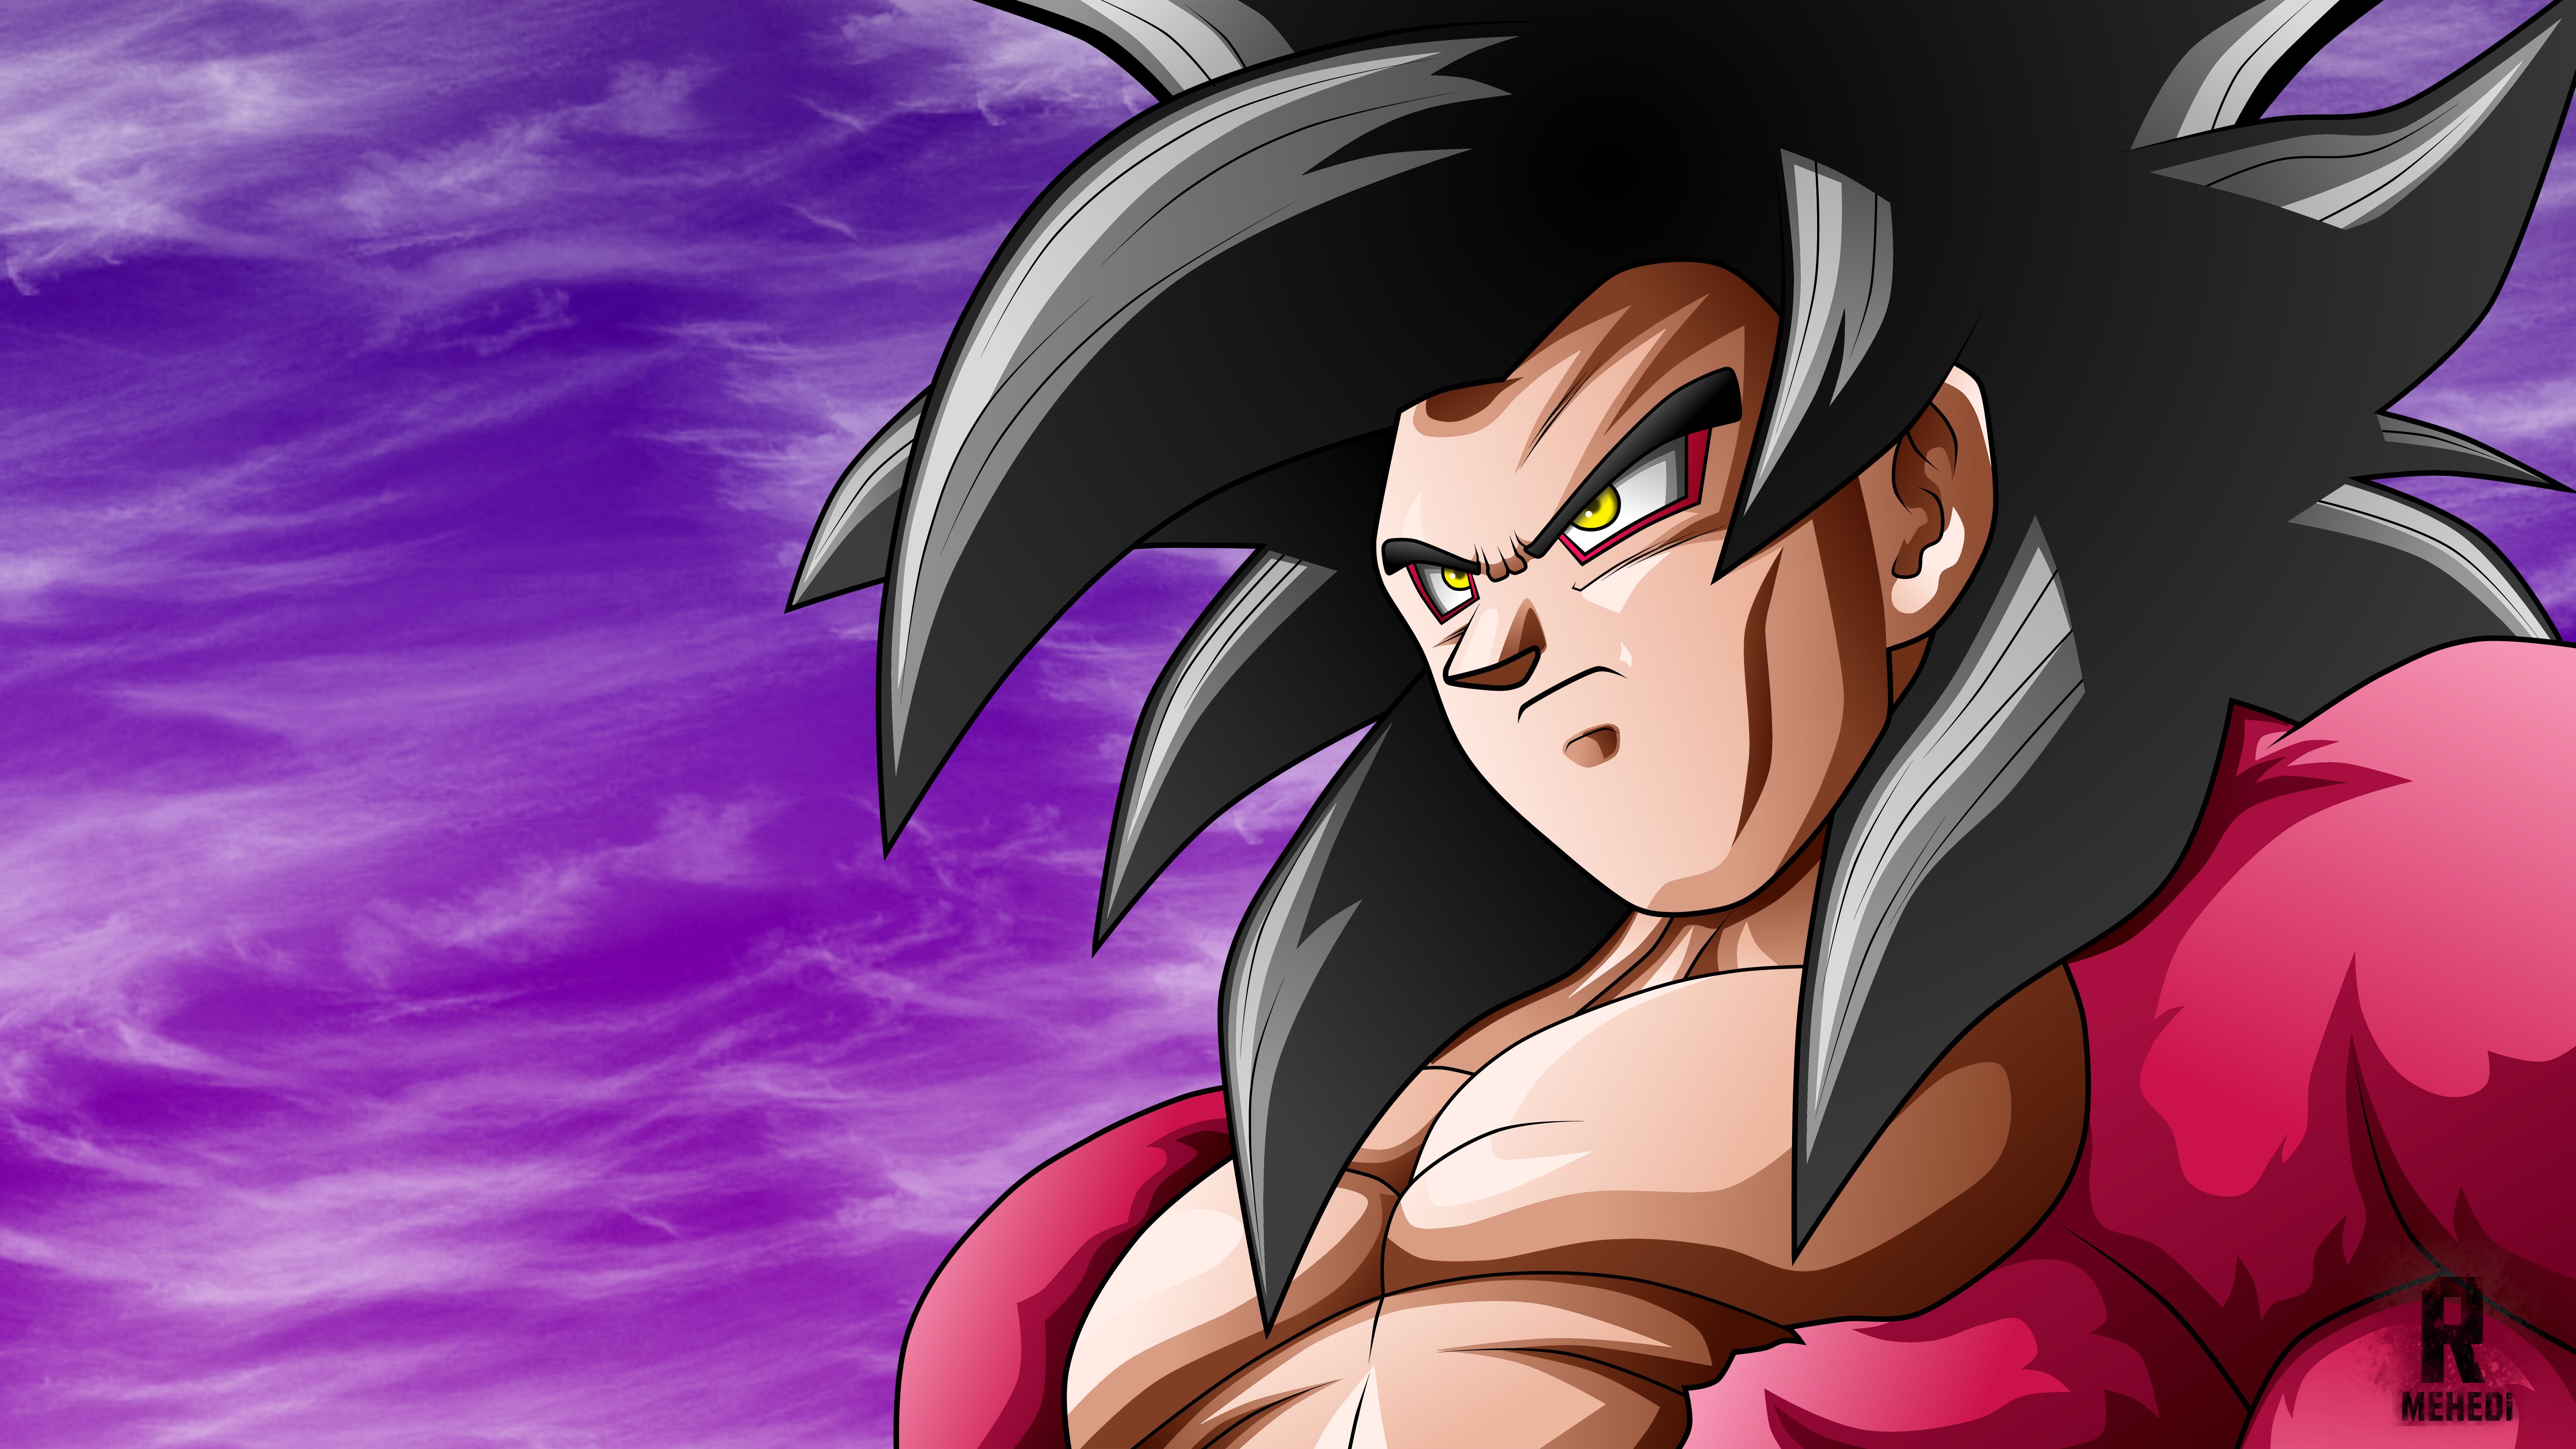 Dragon ball gt Wallpapers Download